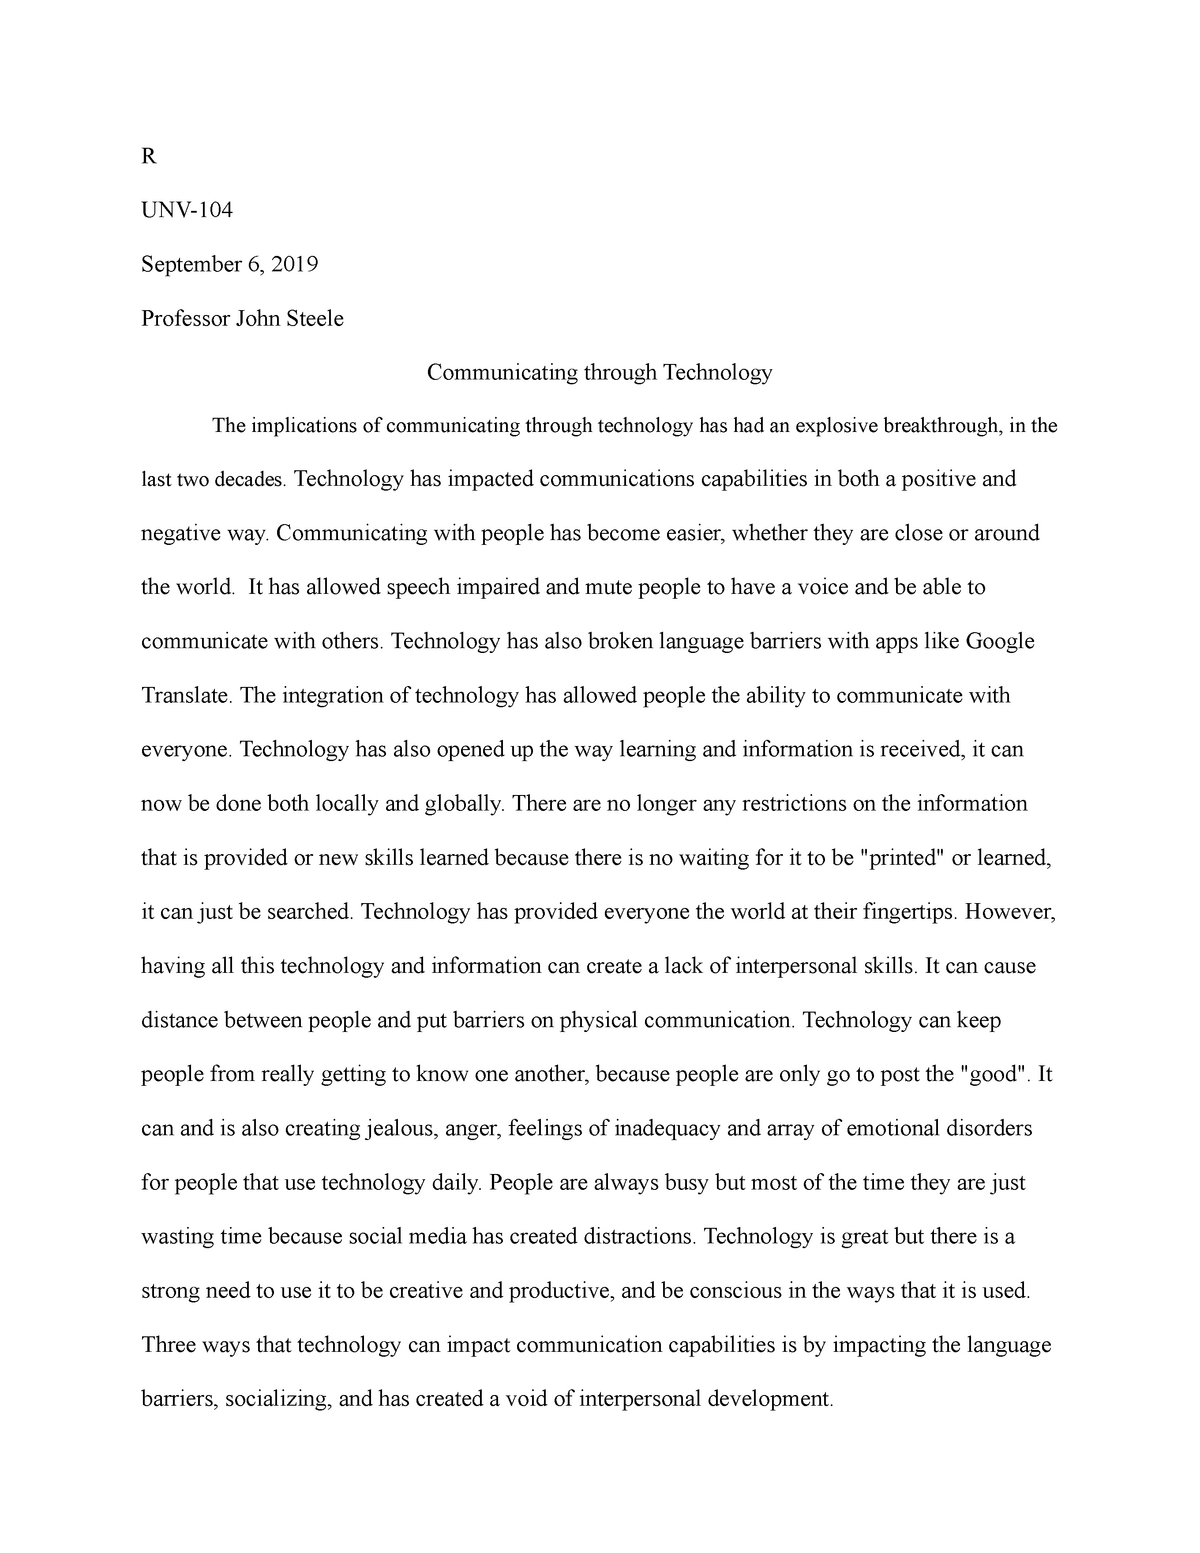 final draft expository essay unv 104